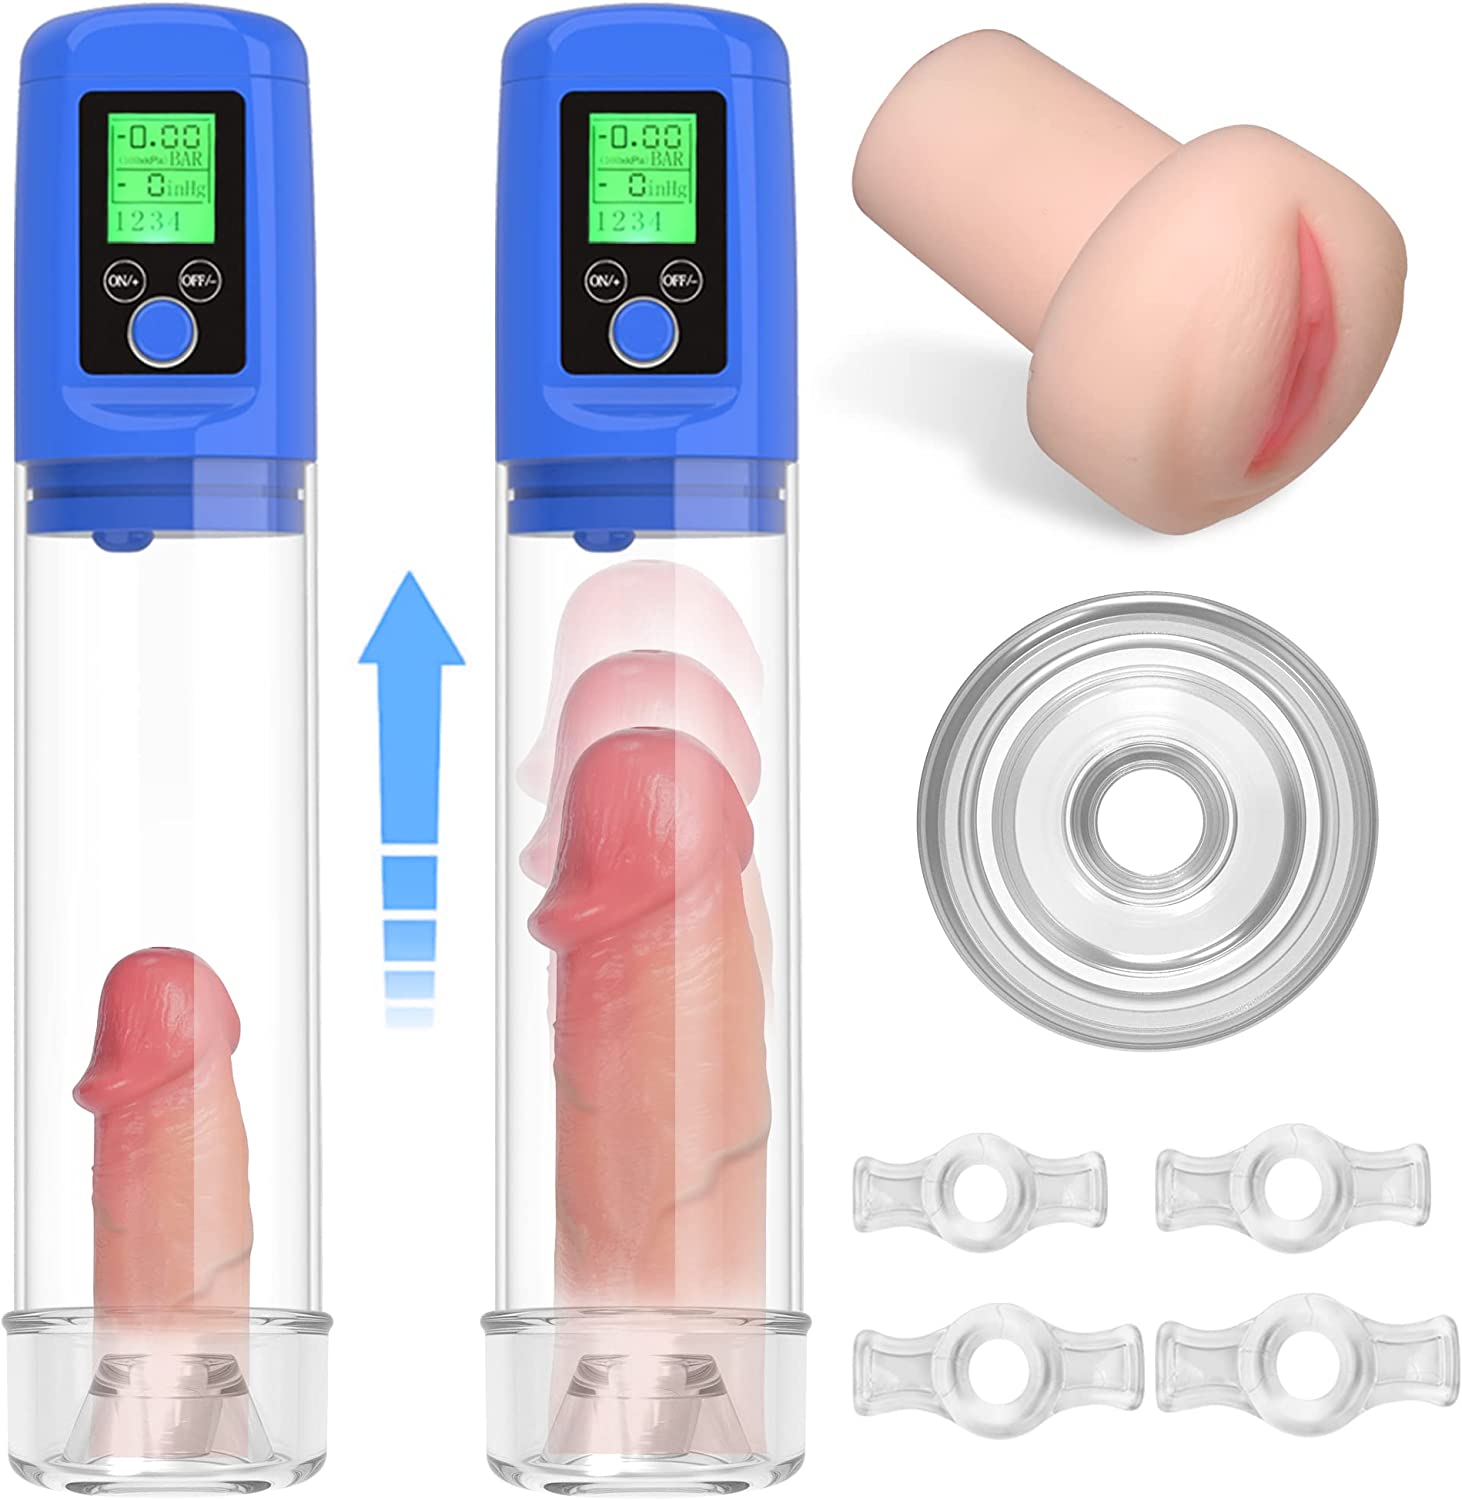 3 in 1 Penis Enlargement Pump™ - Anxiety Toys For Men Anxiety Toys For Men Anxiety Toys For Men